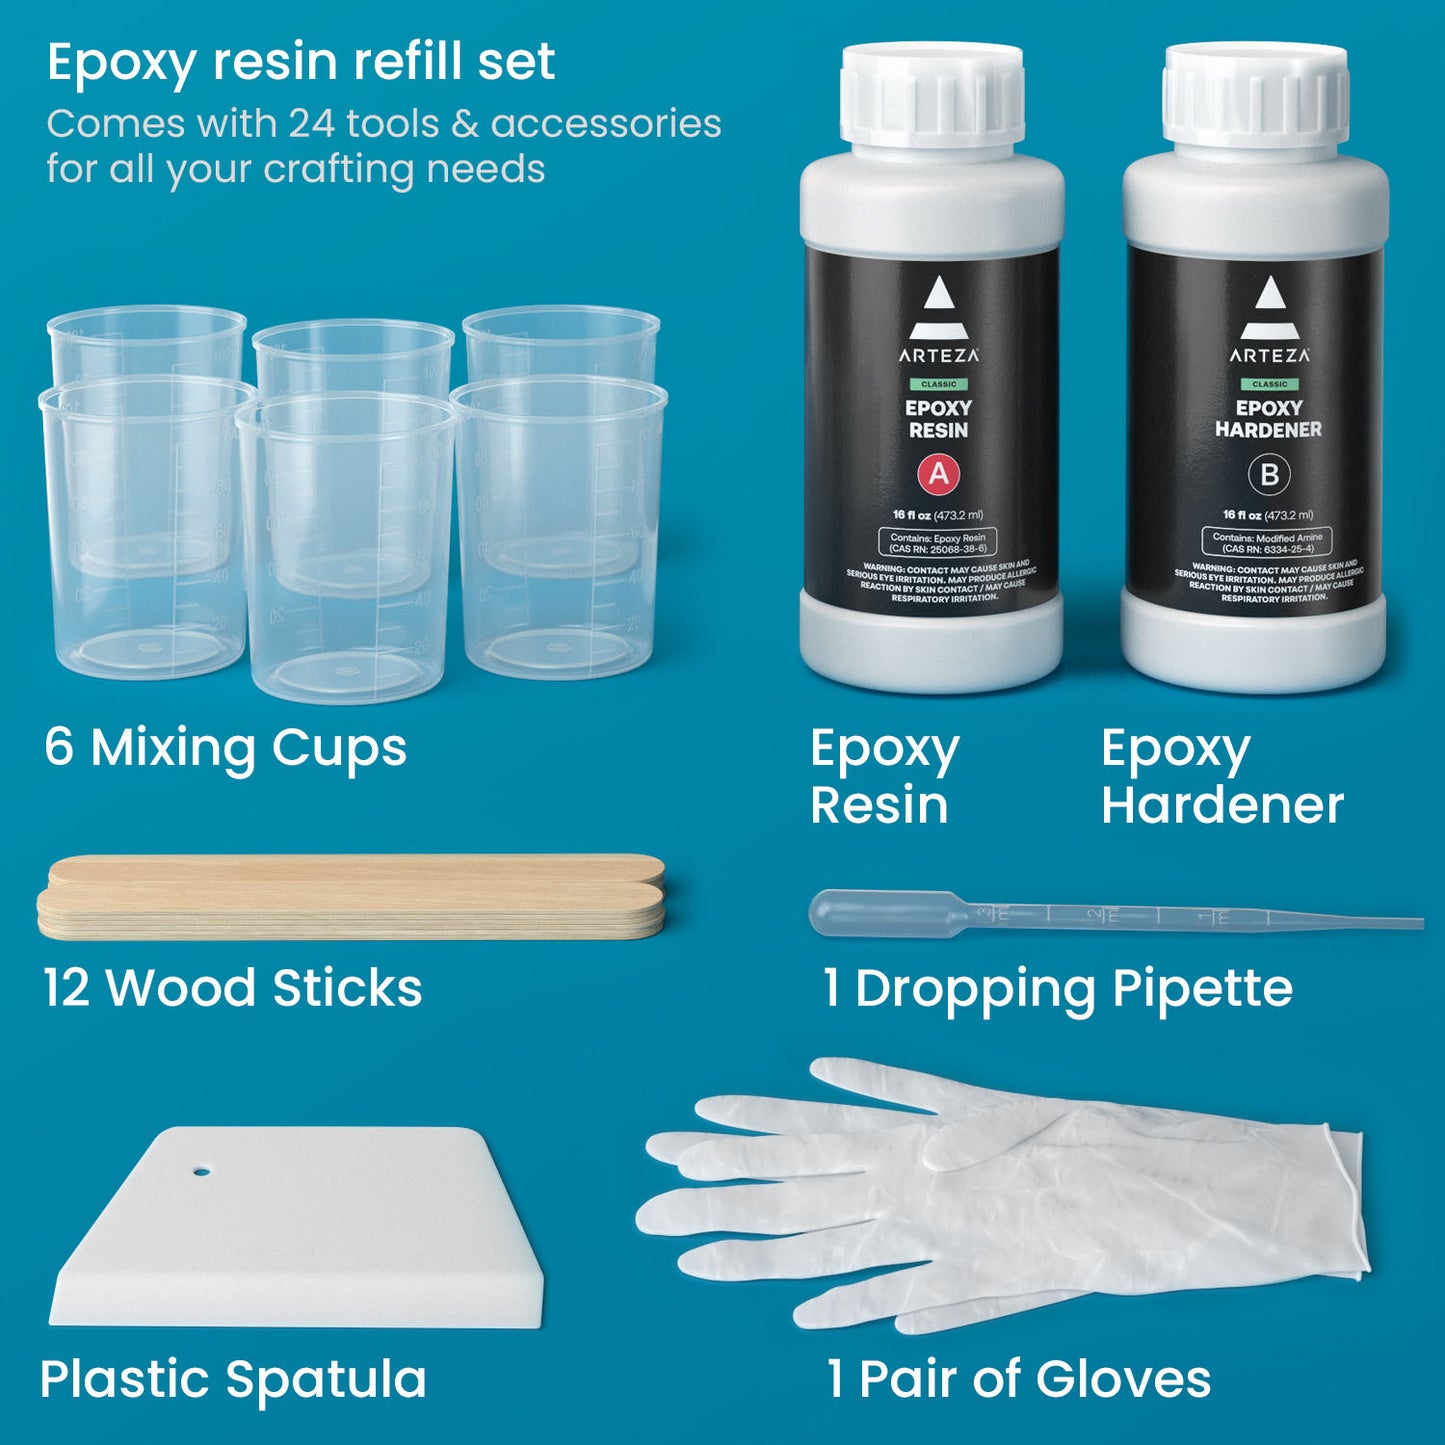 32oz. Epoxy Resin Refill Set with Accessories